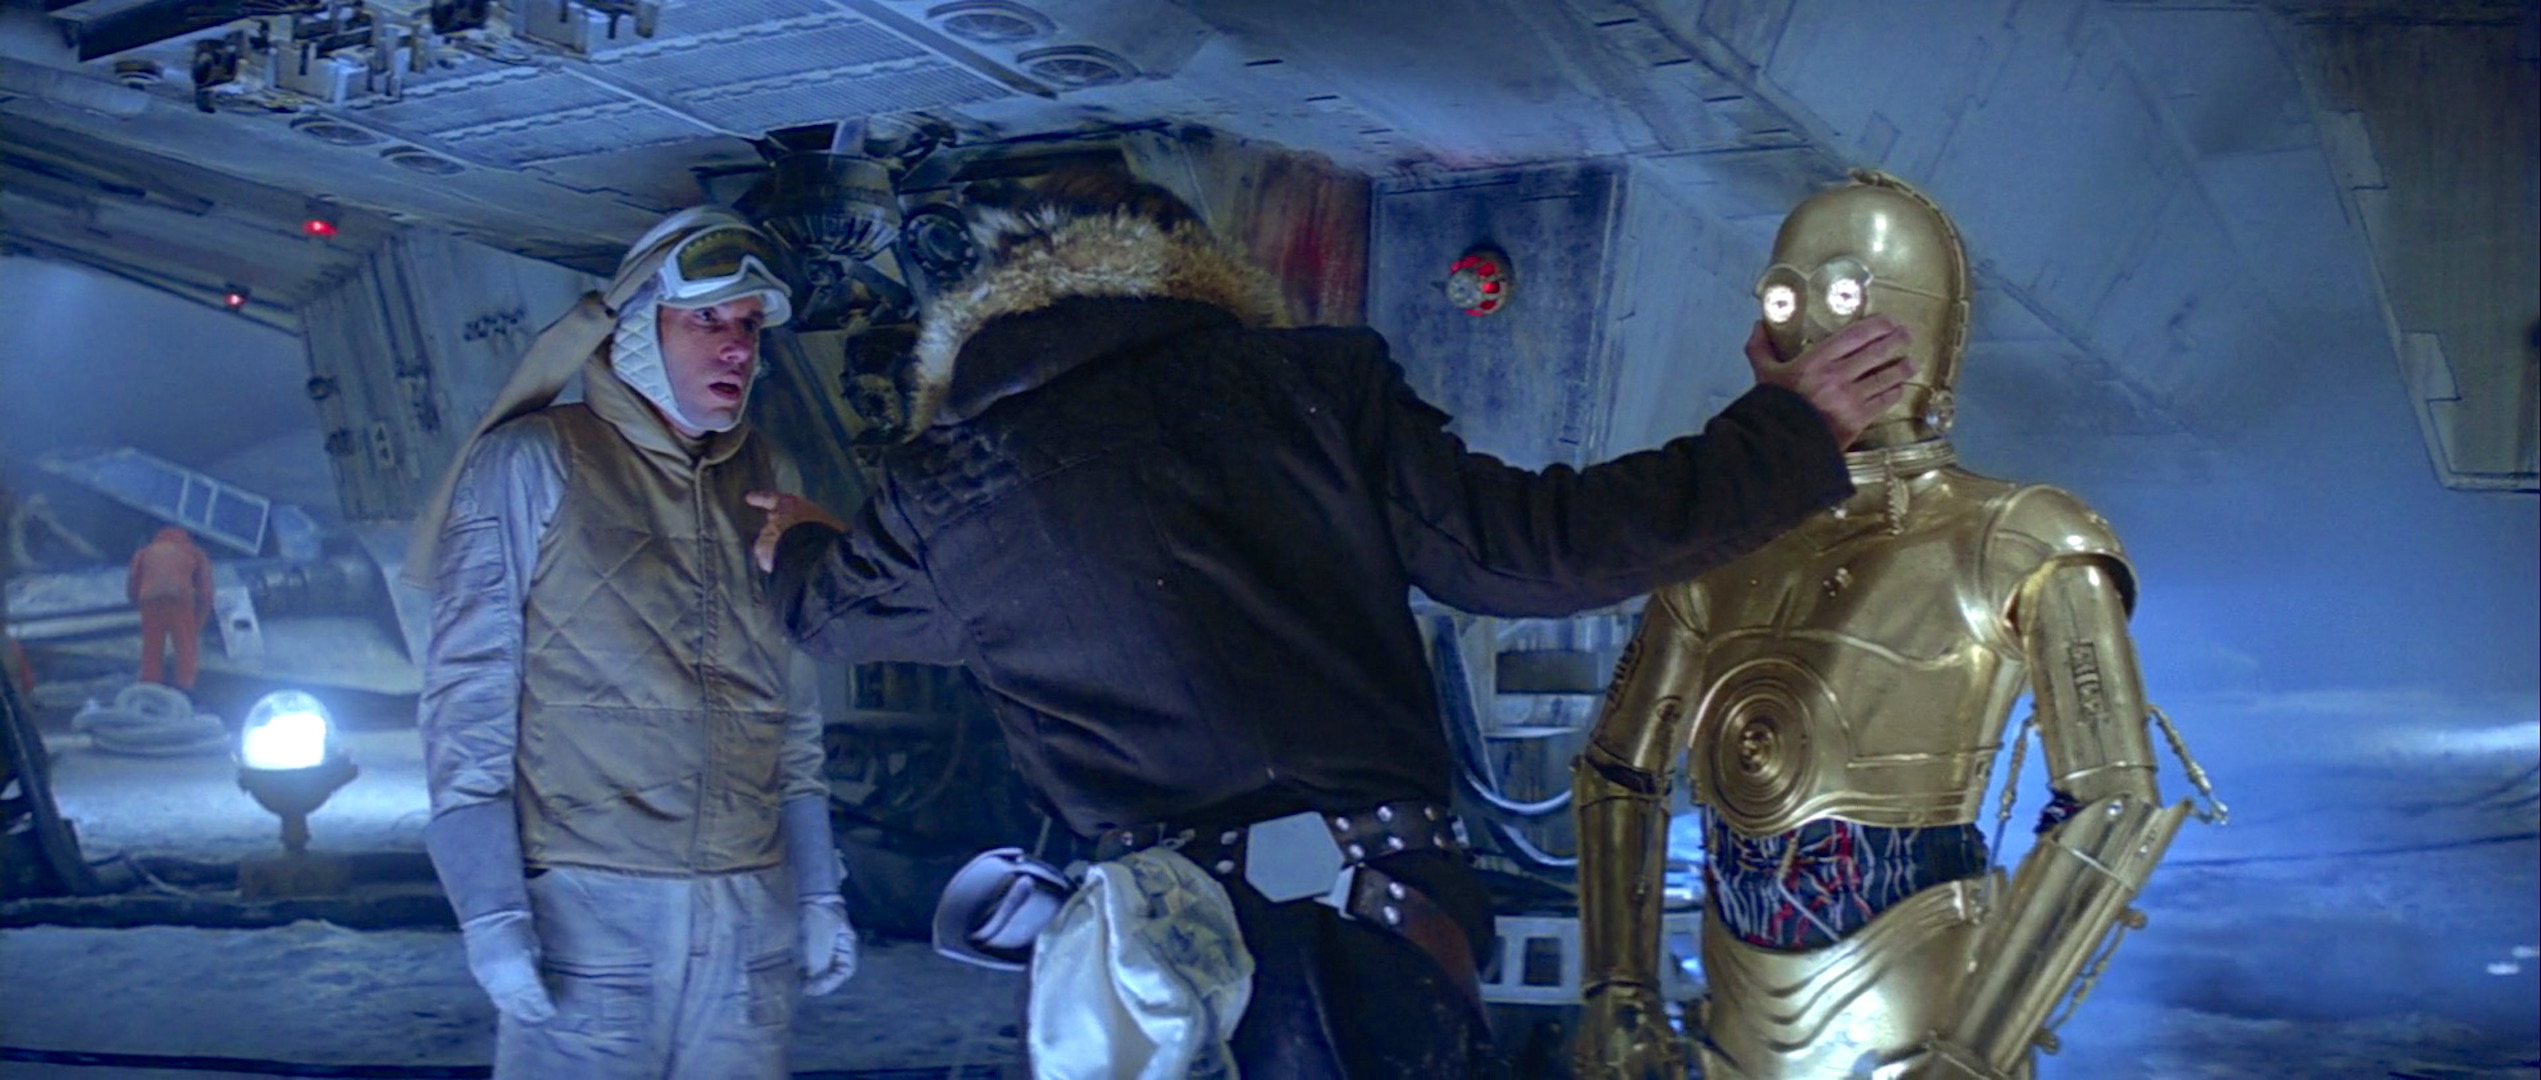 Harrison Ford, Anthony Daniels, and Norman Chancer in Star Wars: Episode V - The Empire Strikes Back (1980)